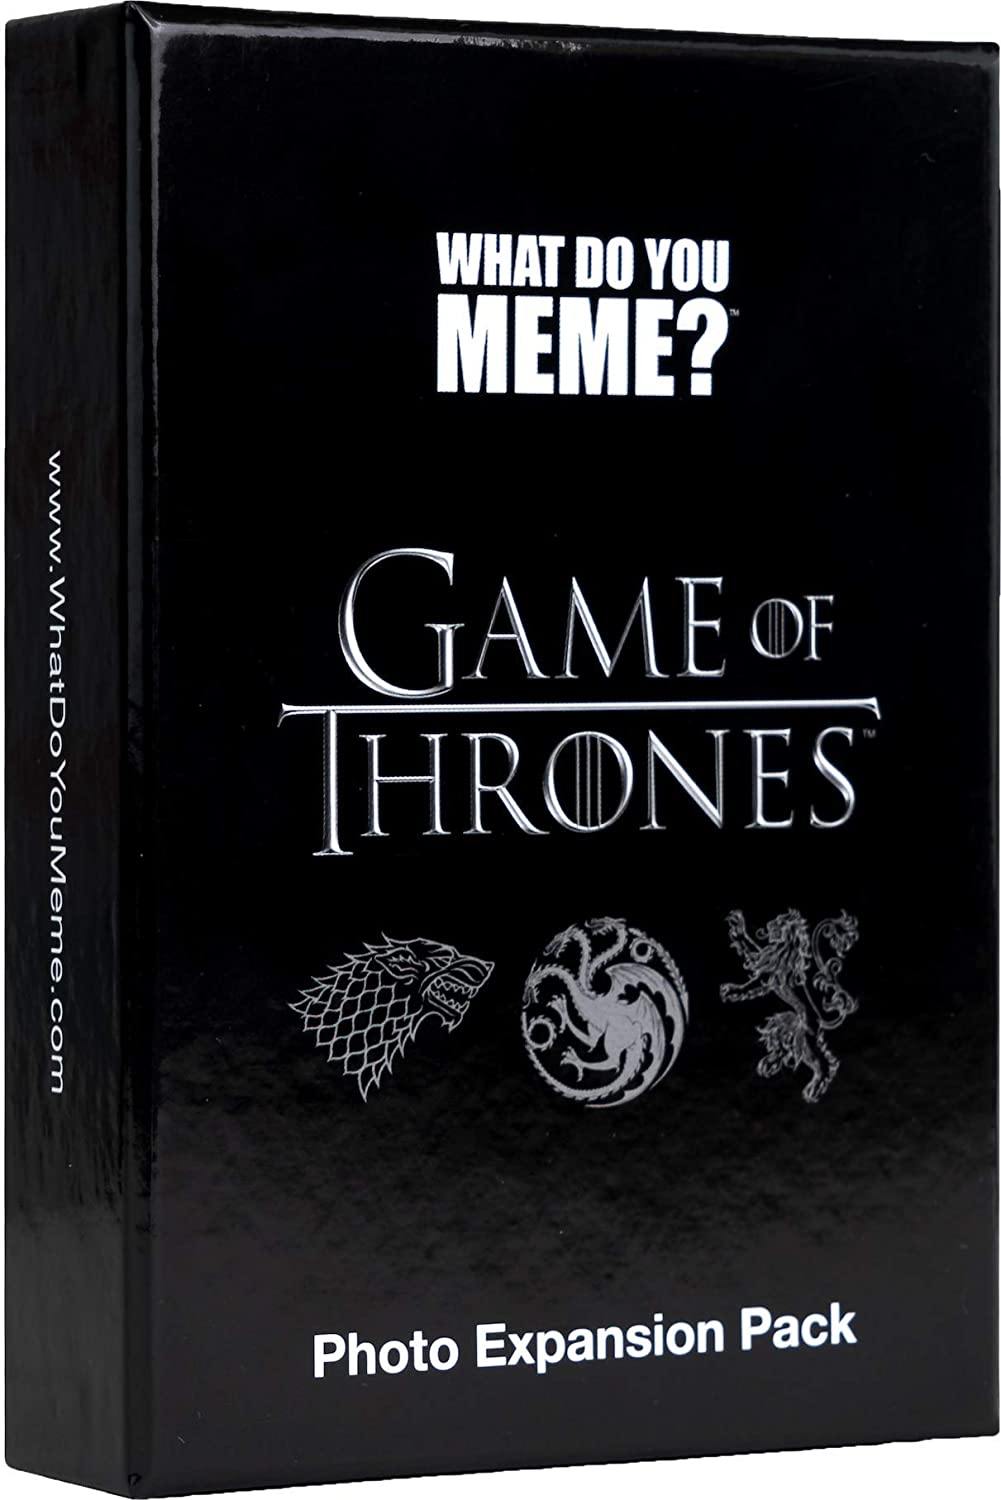 What do you Meme? Game of Thrones Photo Expansion Pack - flash vidéo